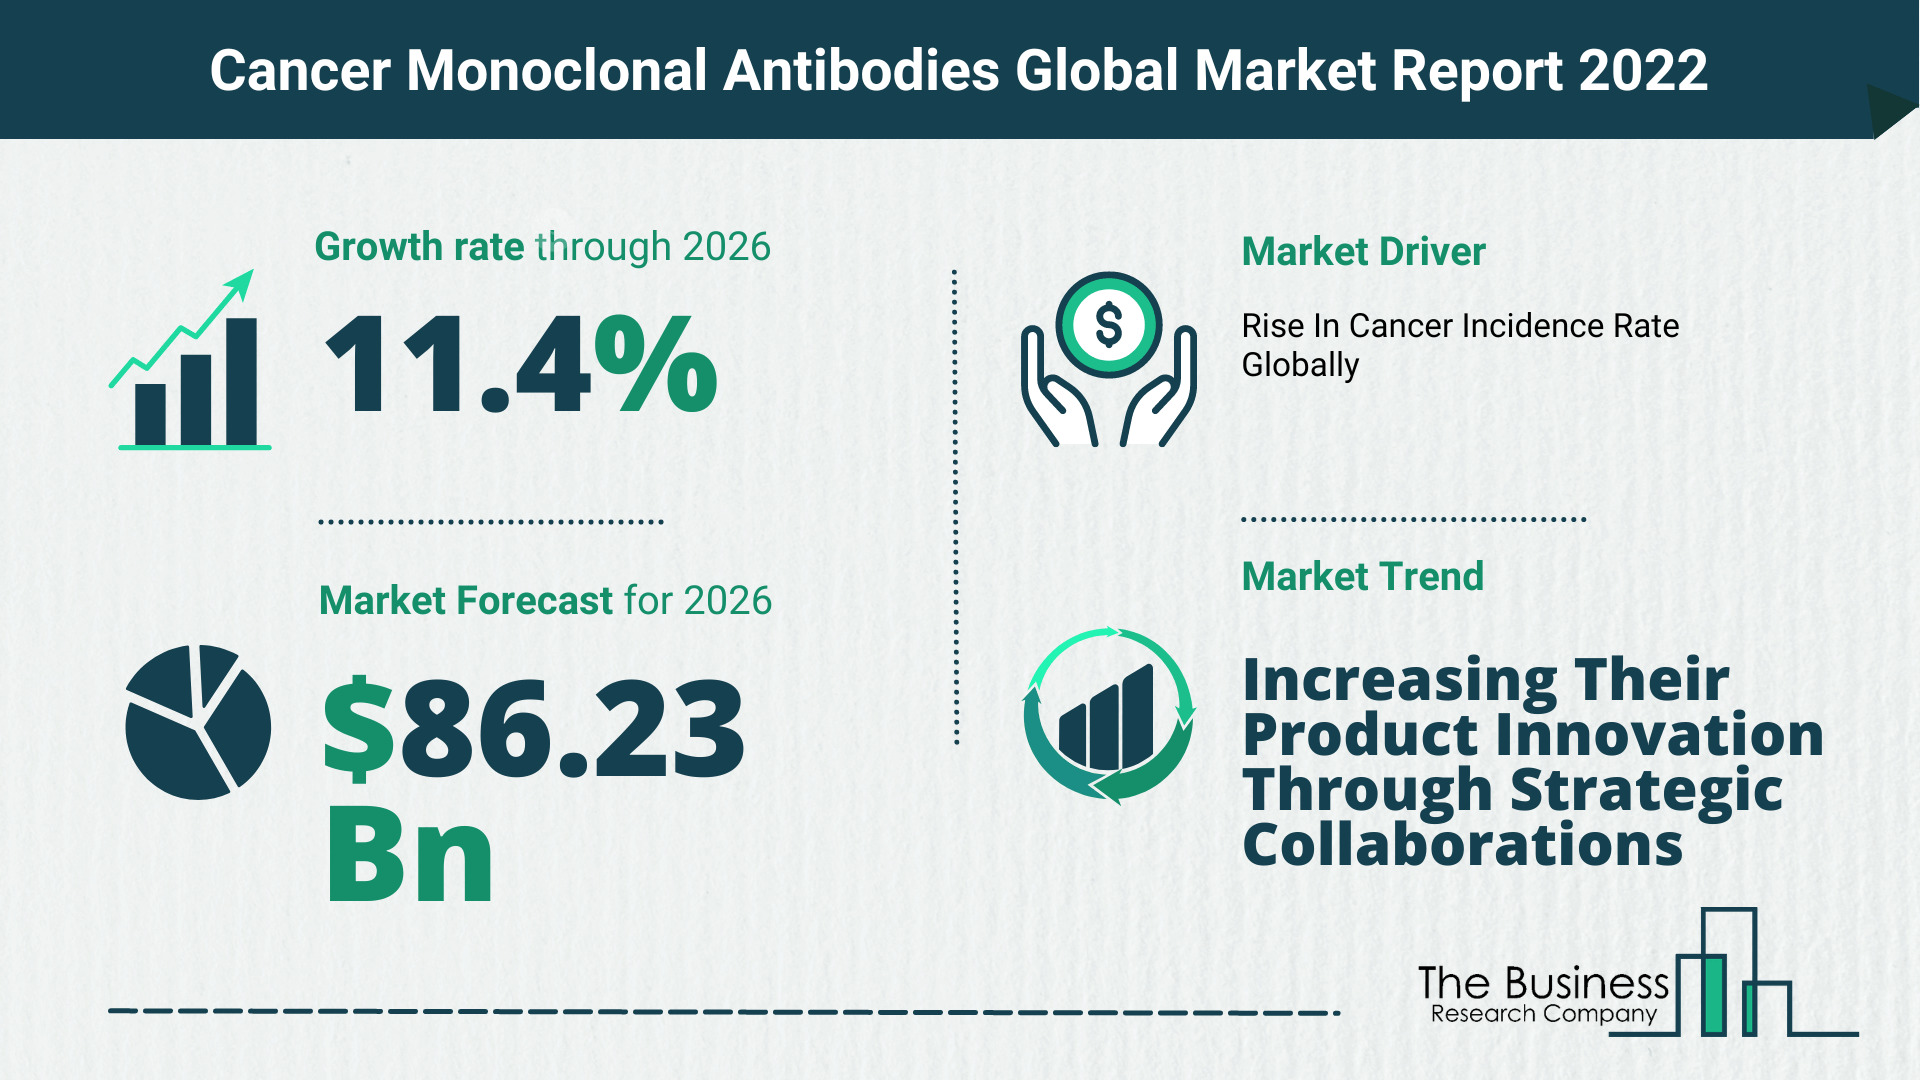 Latest Cancer Monoclonal Antibodies Market Growth Study 2022-2026 By The Business Research Company